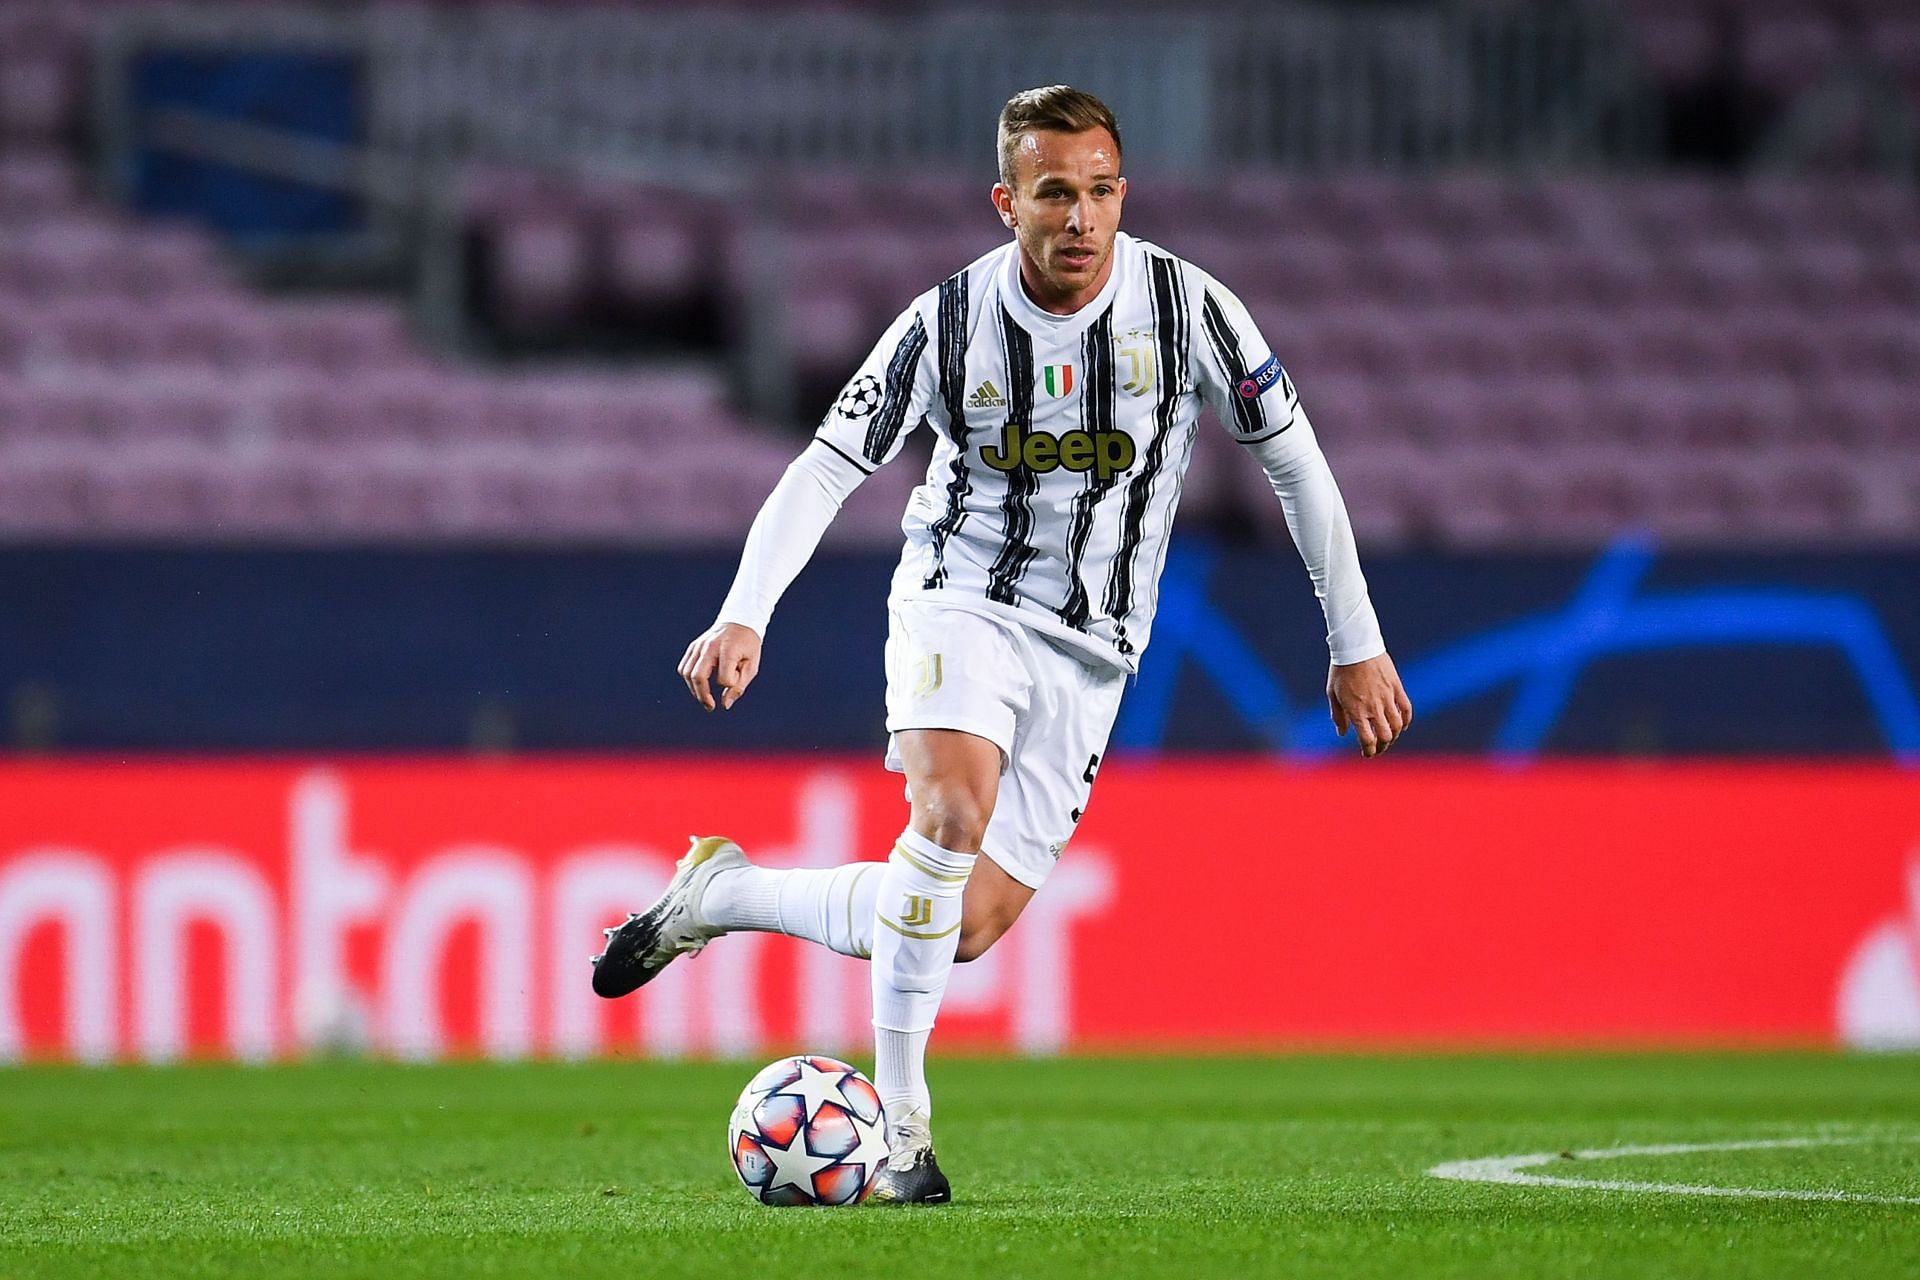 Arsenal have received a setback in their pursuit of Arthur Melo.